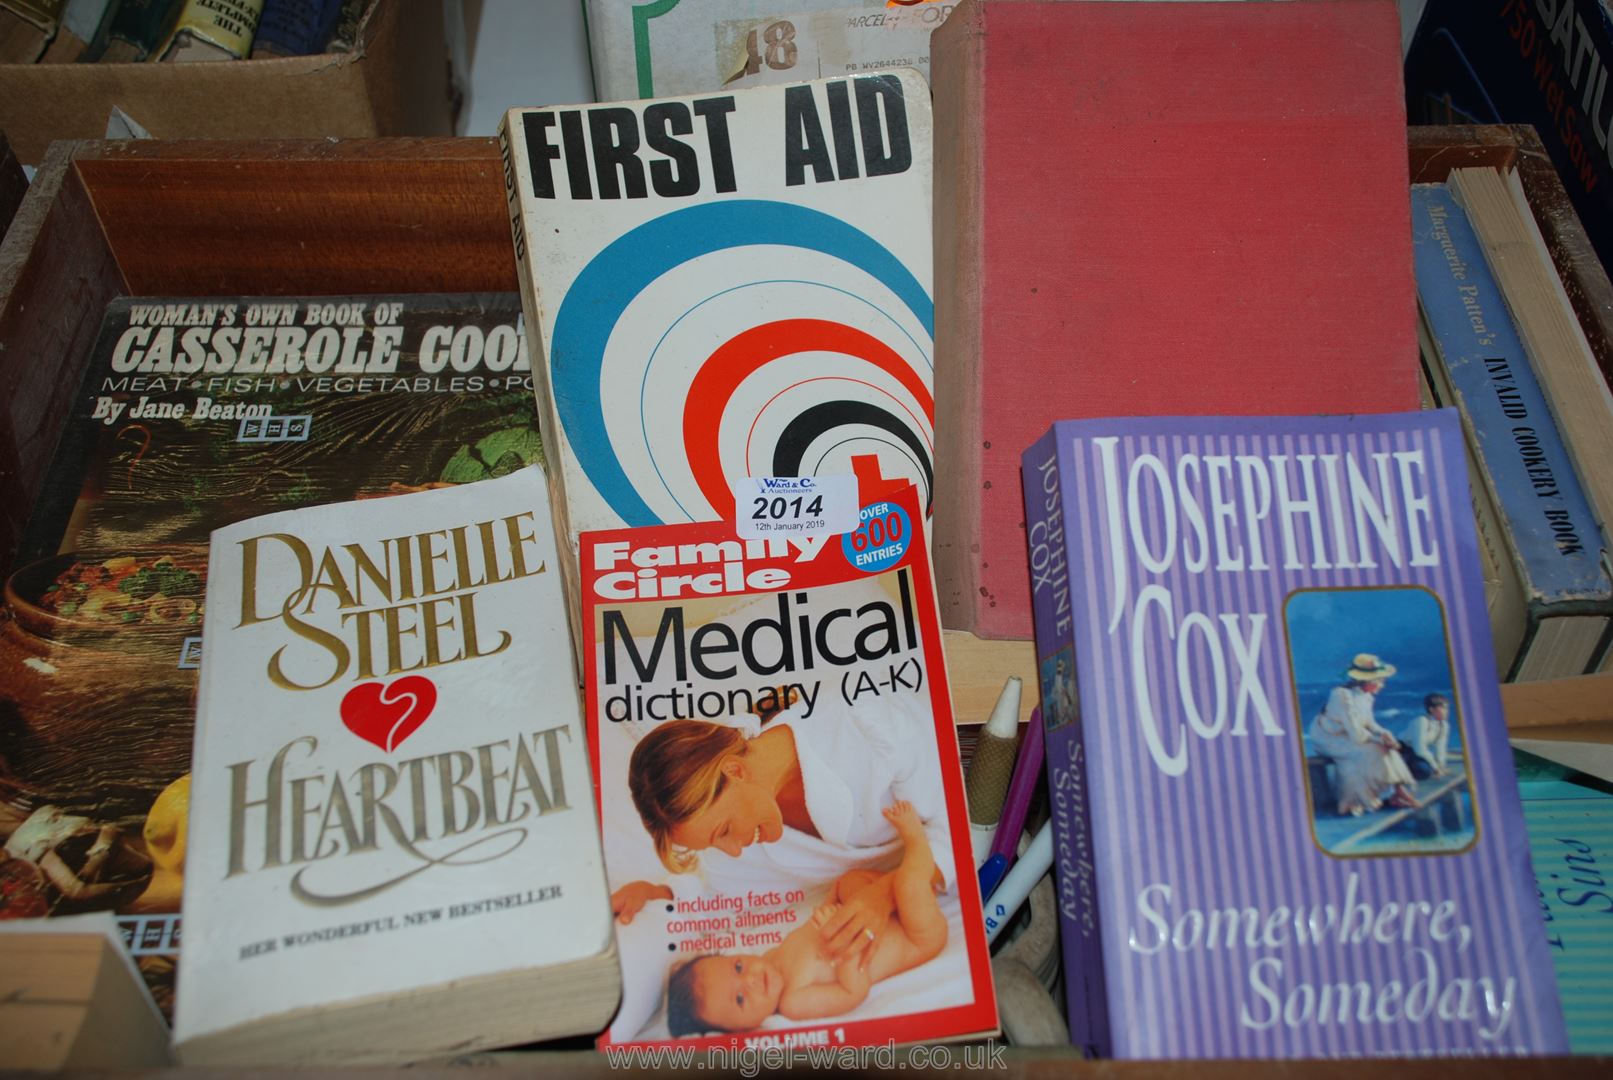 A quantity of books including; Cookery, First Aid and paperback novels.